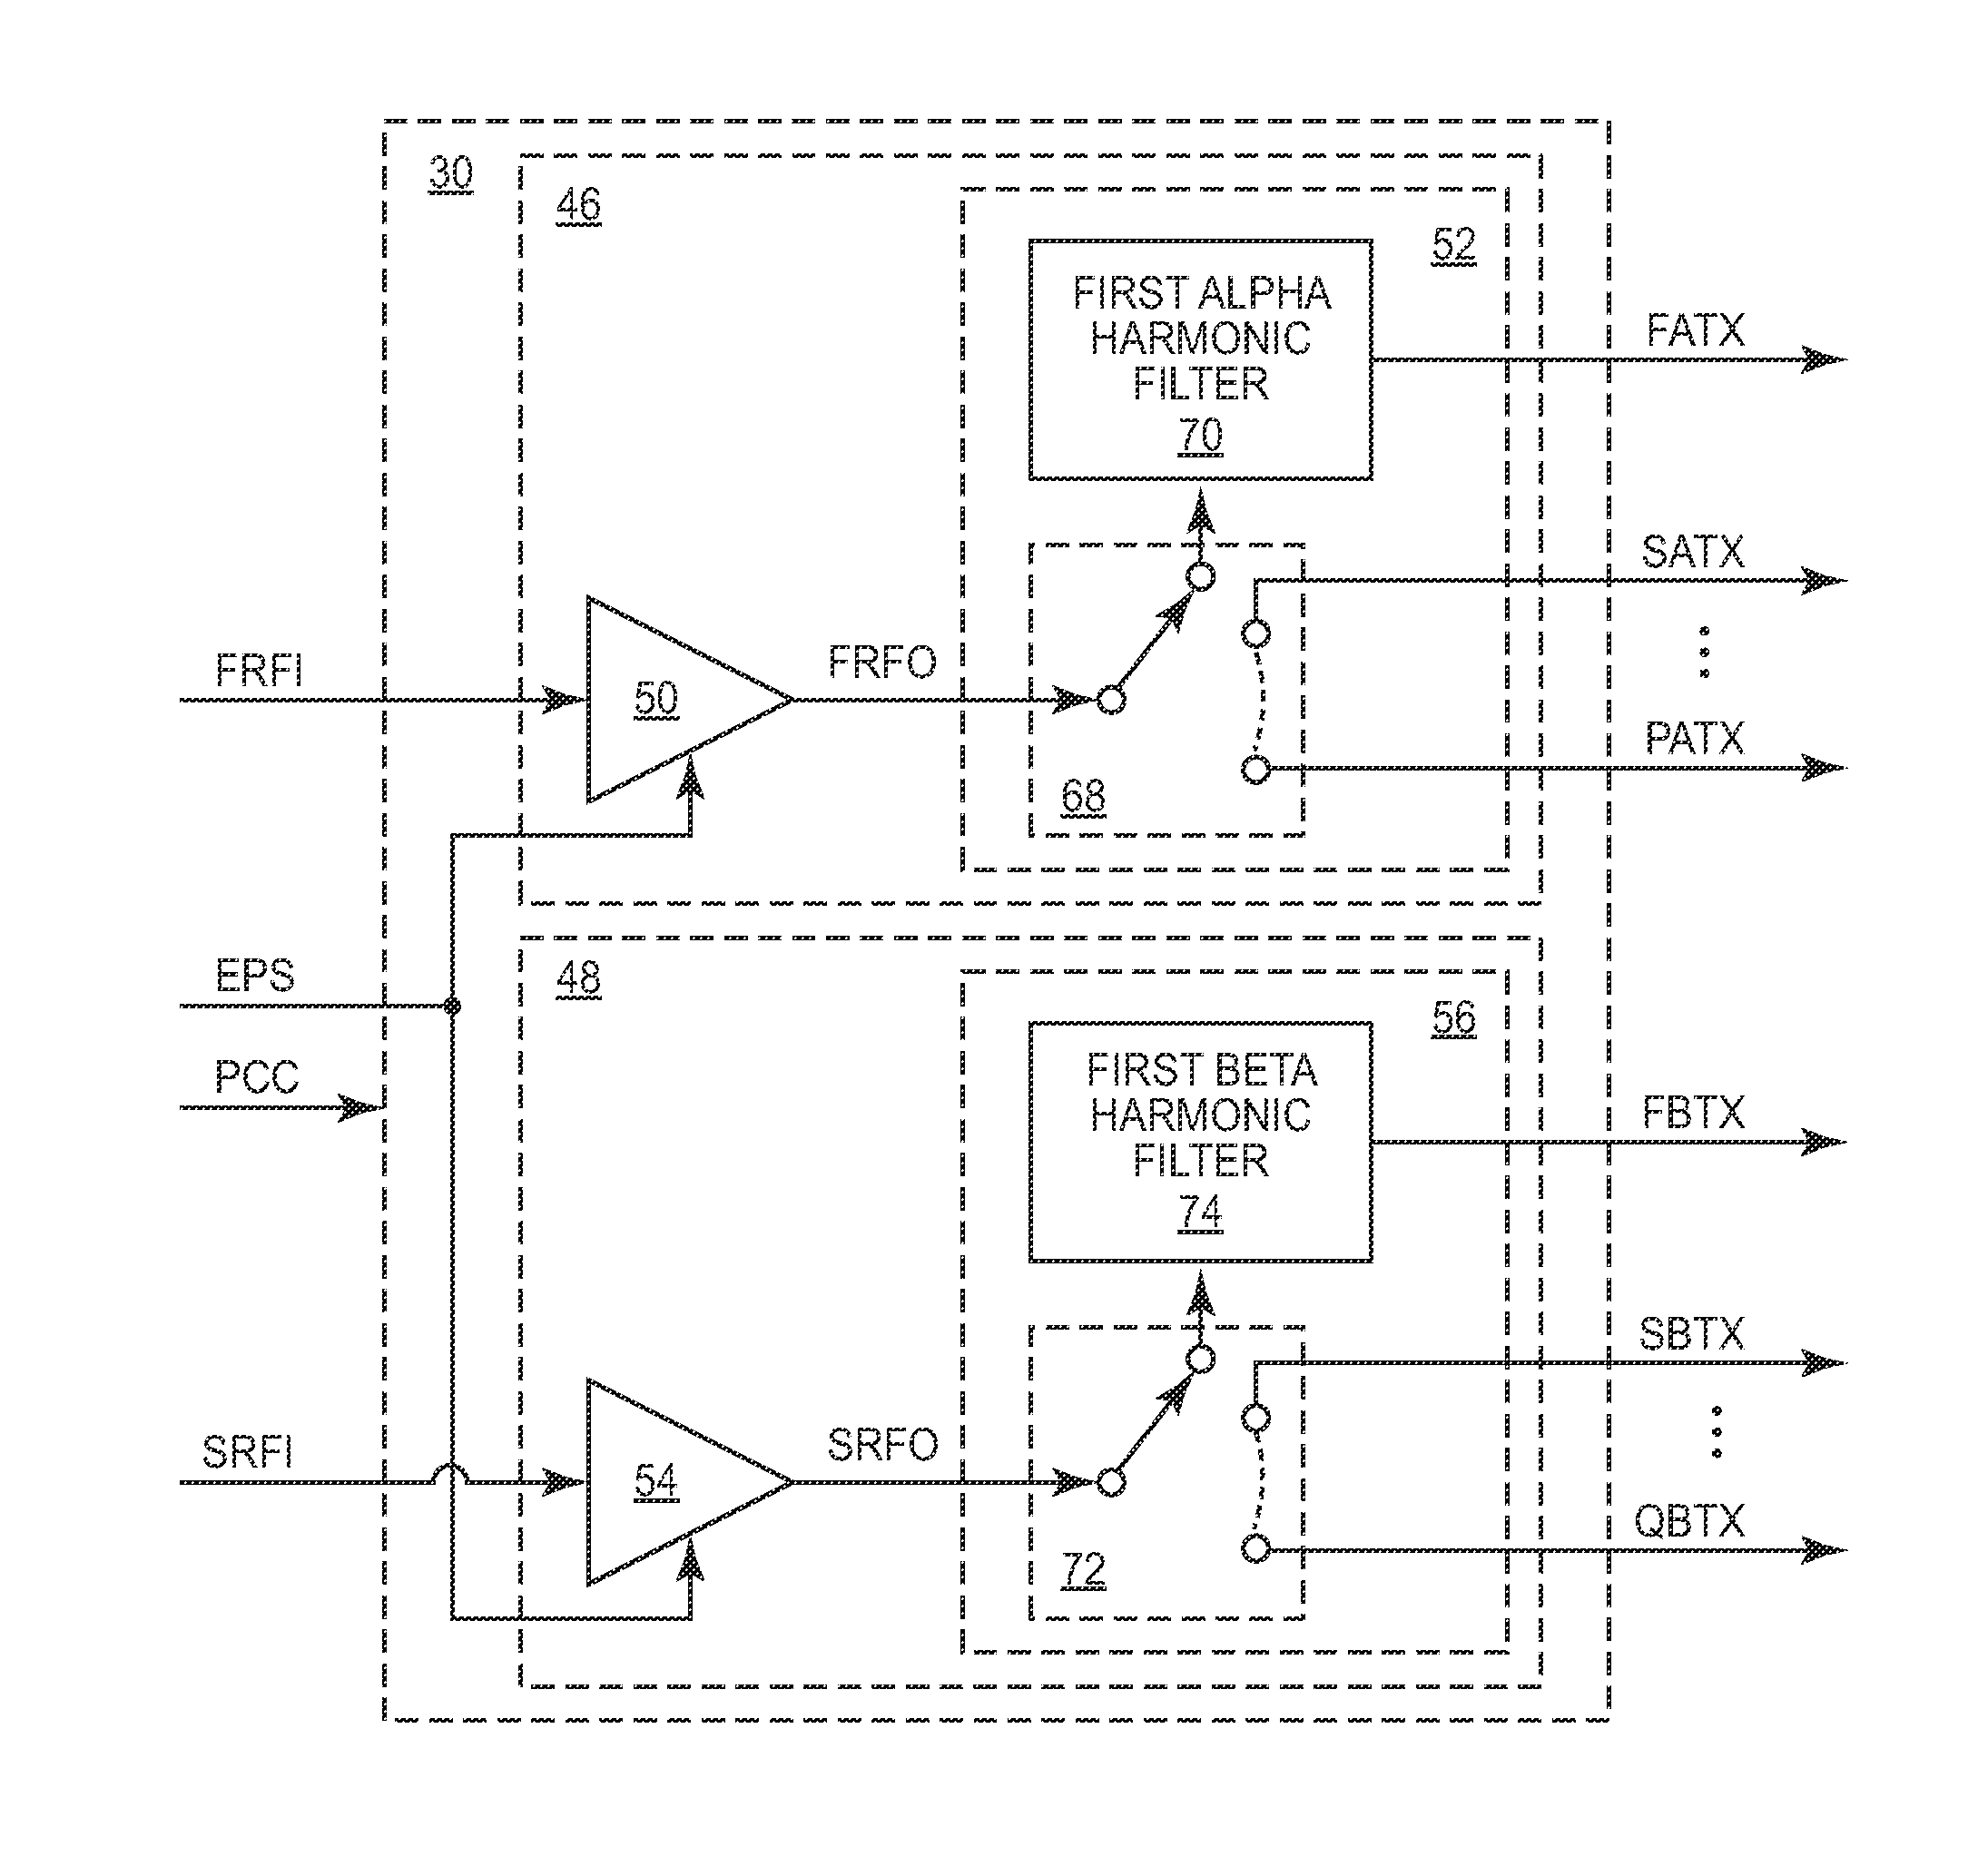 Dynamic device switching (DDS) of an in-phase RF pa stage and a quadrature-phase RF pa stage